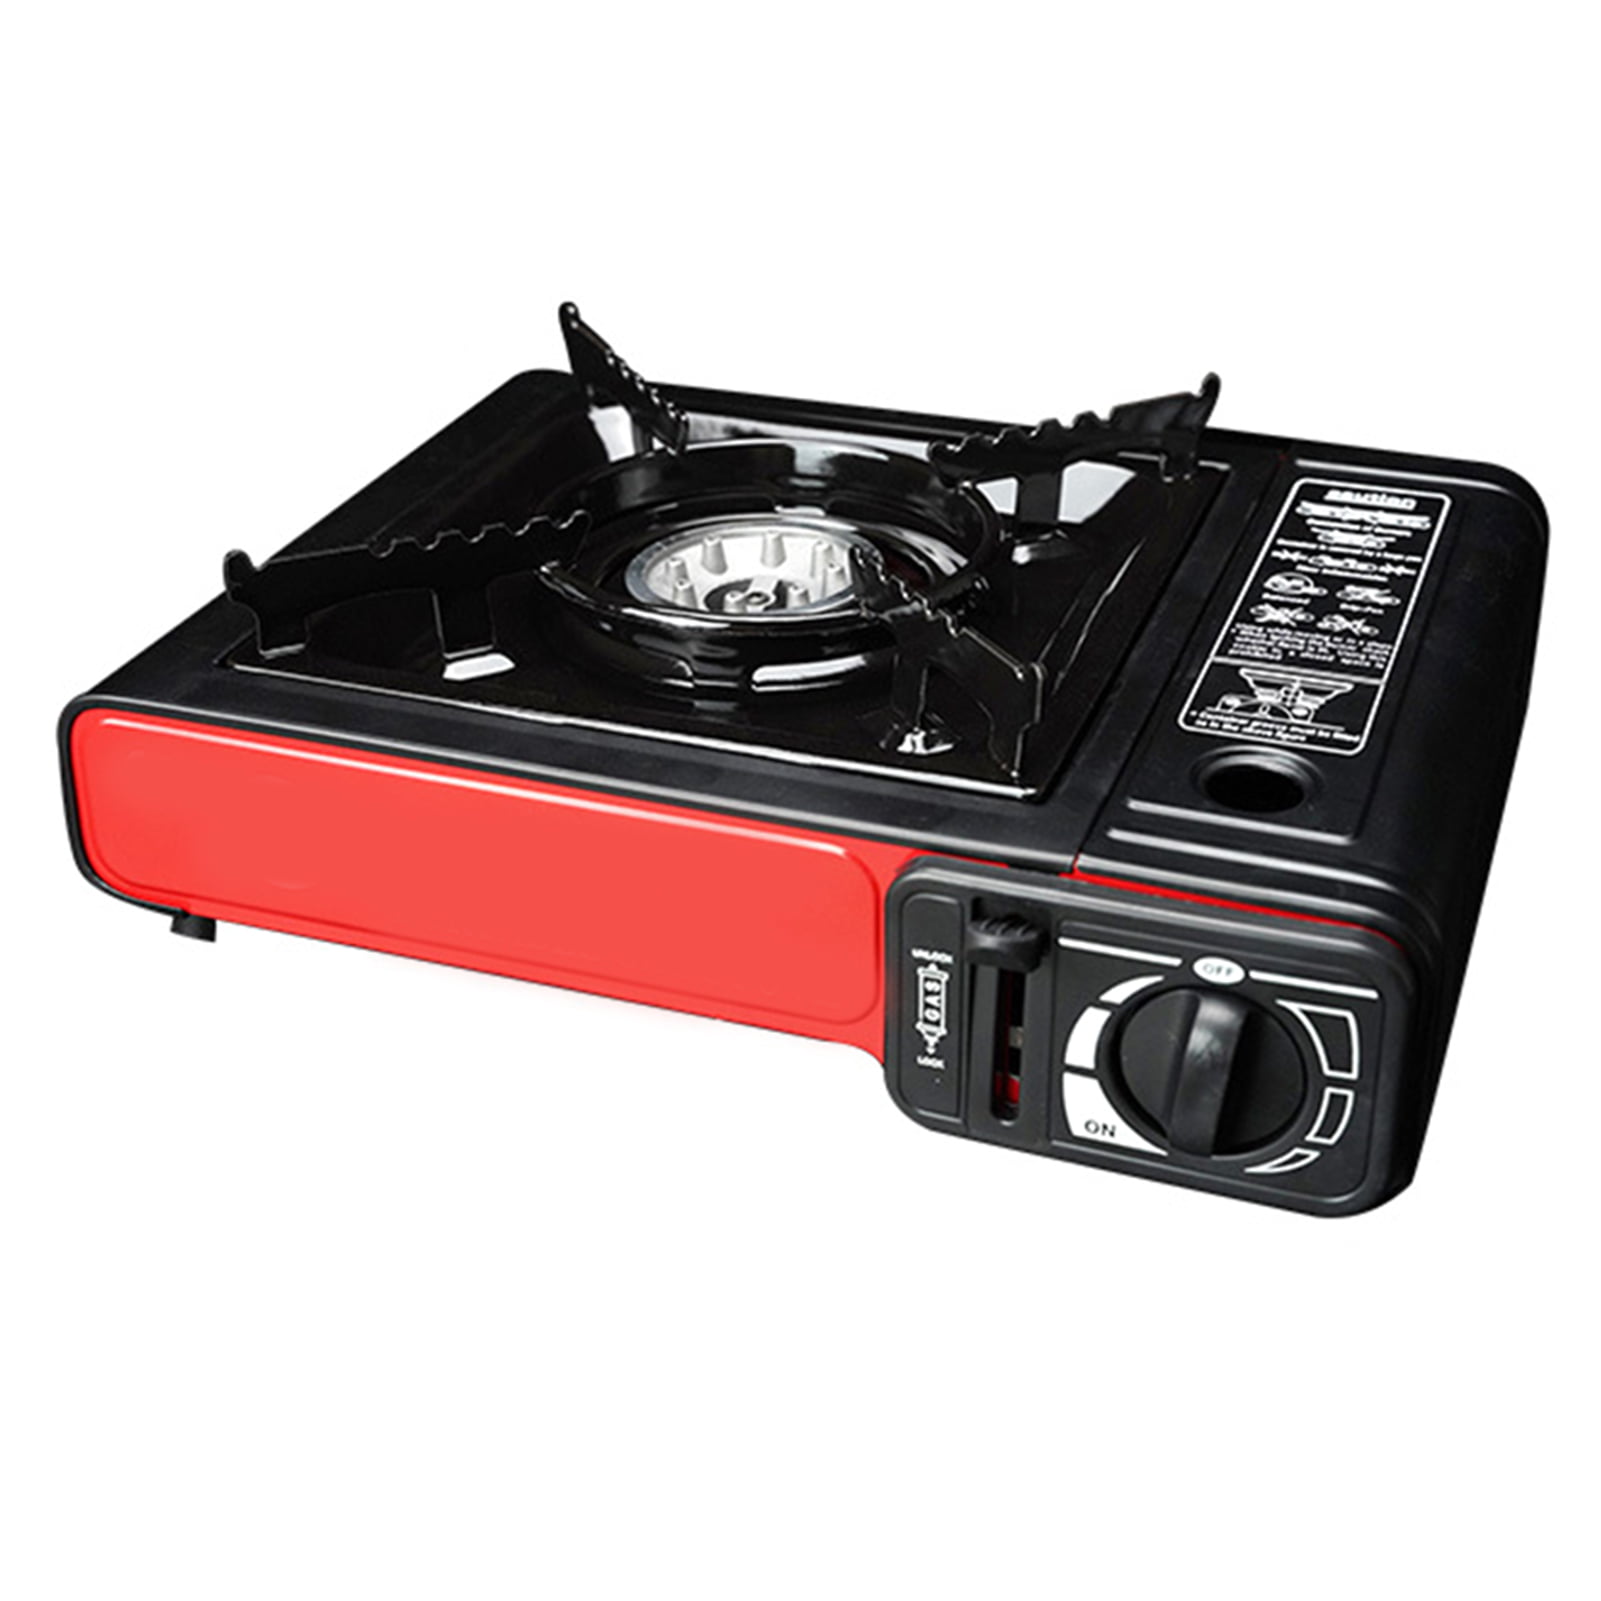 Odoland Gas Camping Stove 3 Burner Portable Tabletop Propane Camping Stove for Camping and Outdoor Cooking Grill 